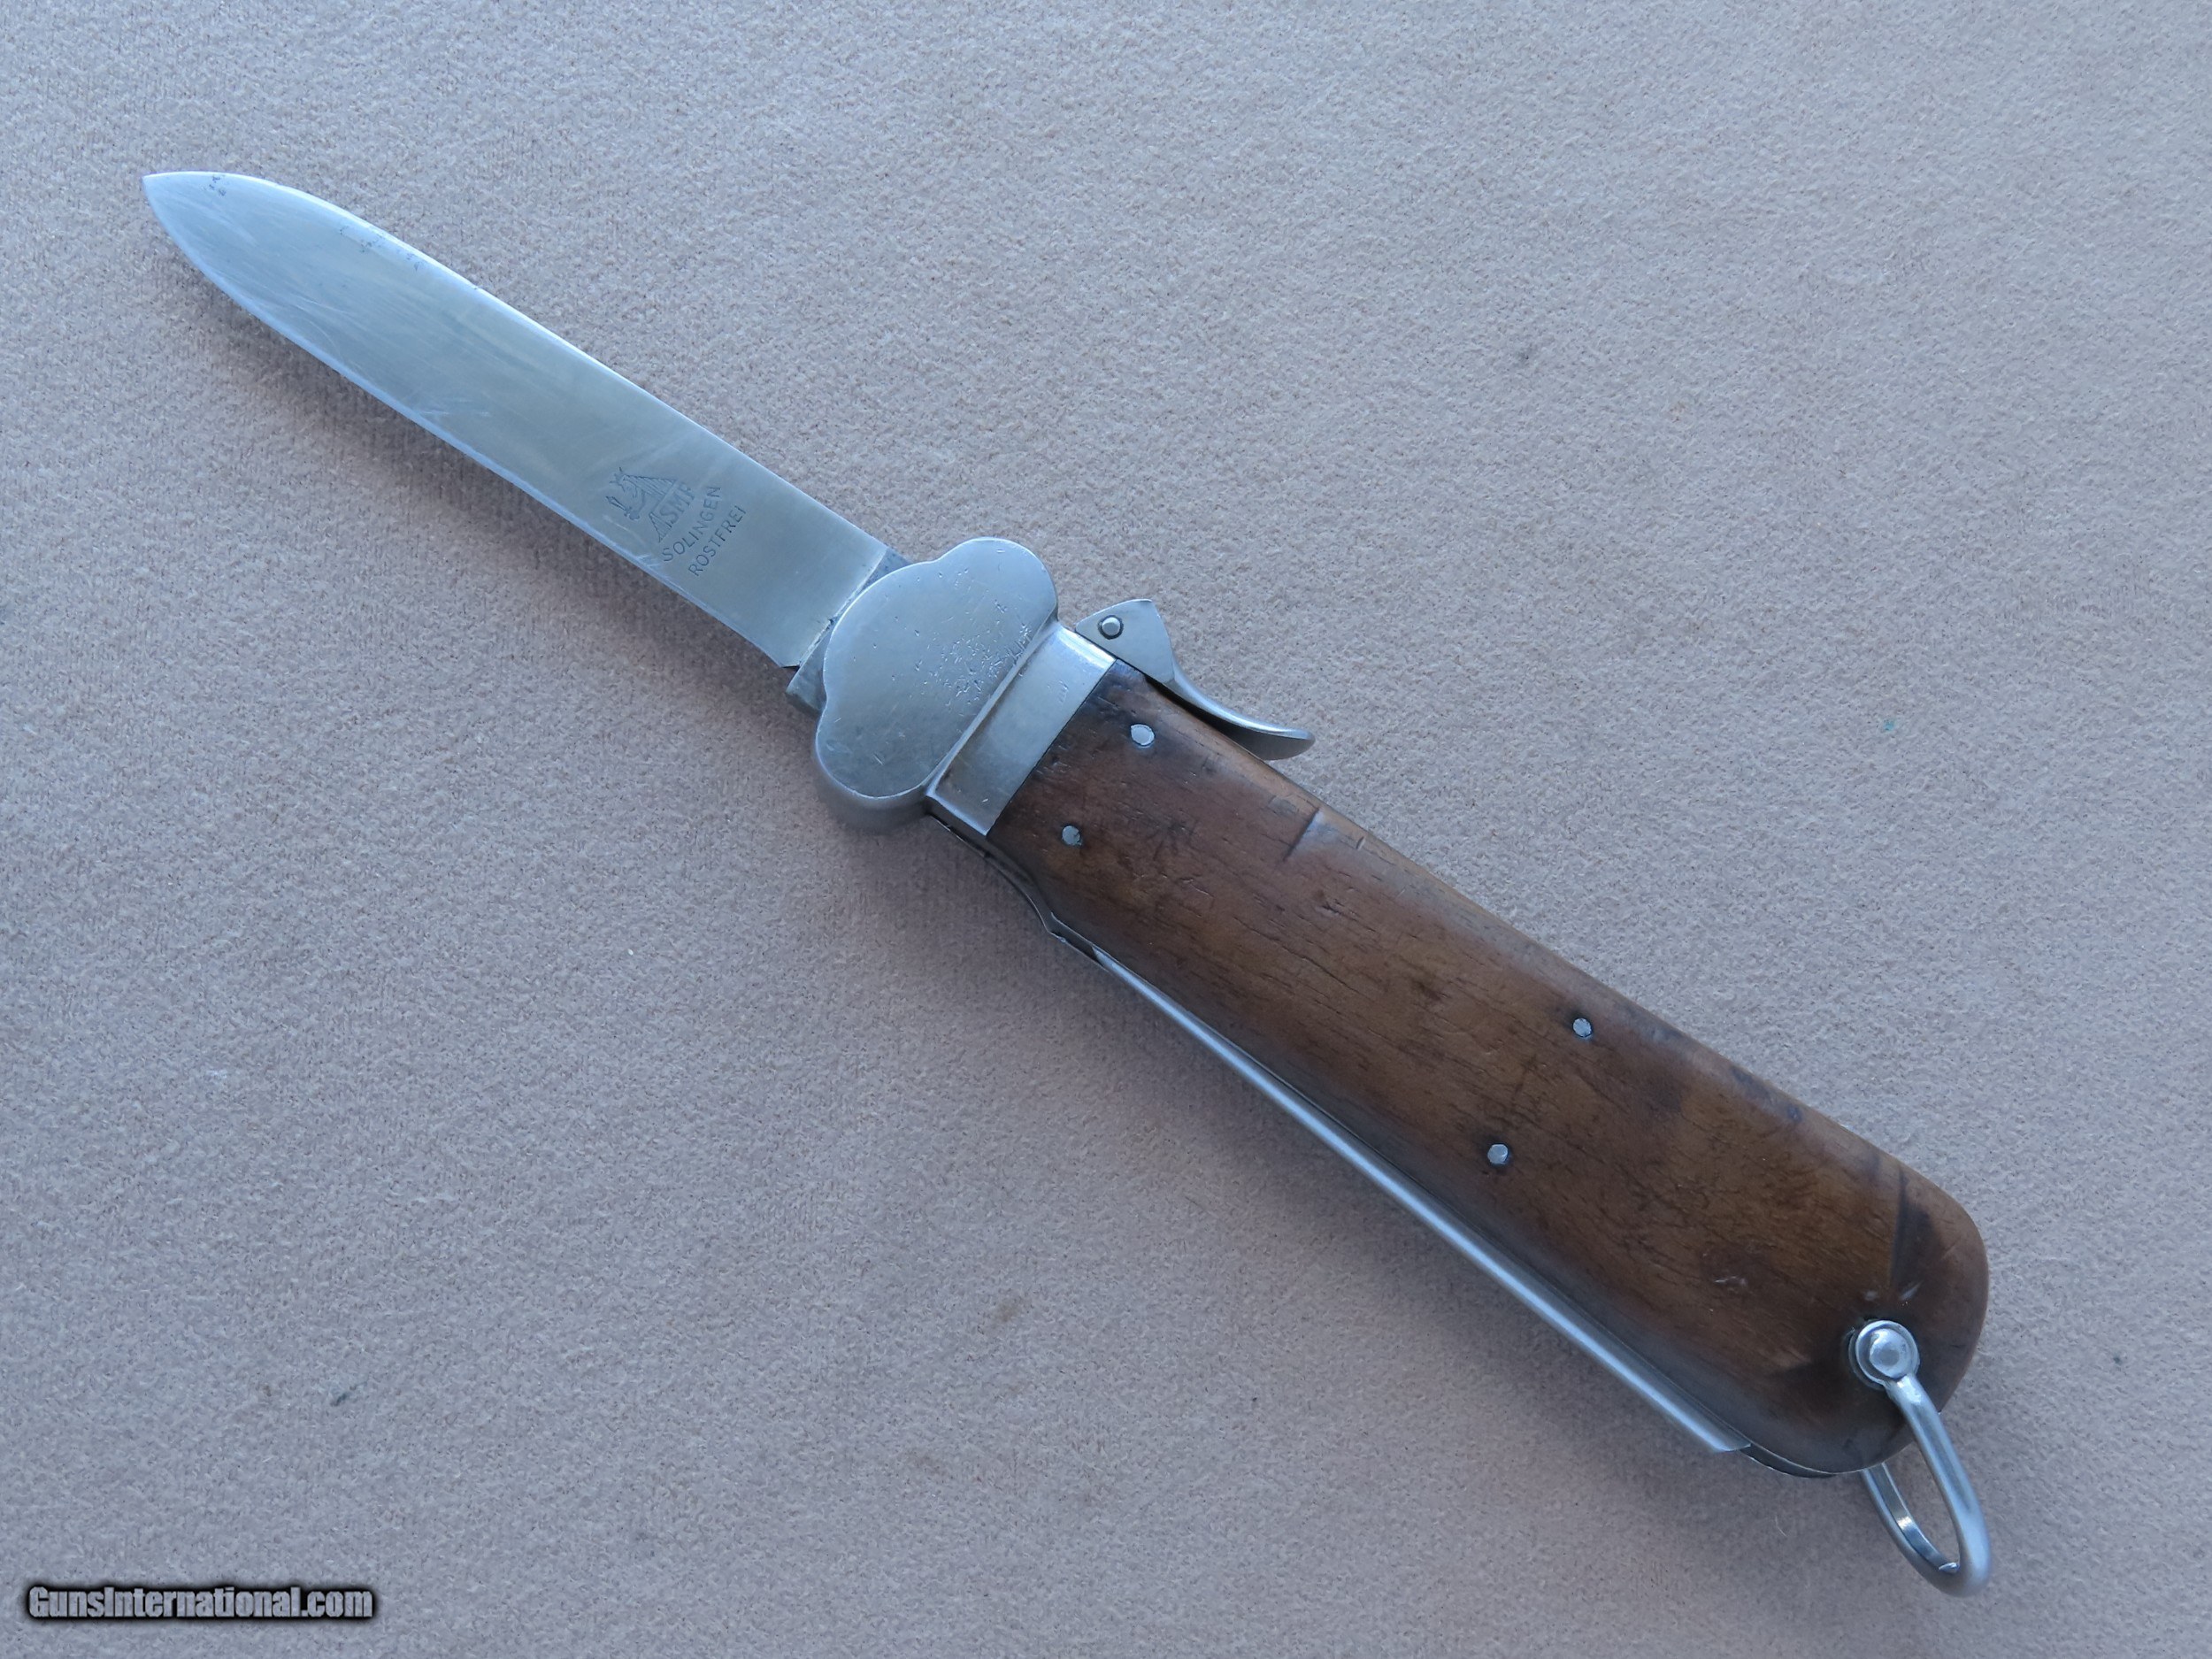 https://images.gunsinternational.com/listings_sub/acc_70986/gi_101315912/WW2-Nazi-Paratrooper-Gravity-Knife-by-SMF-in-Solingen-All-Original-and-Matching_101315912_70986_98513D8D033F0942.JPG